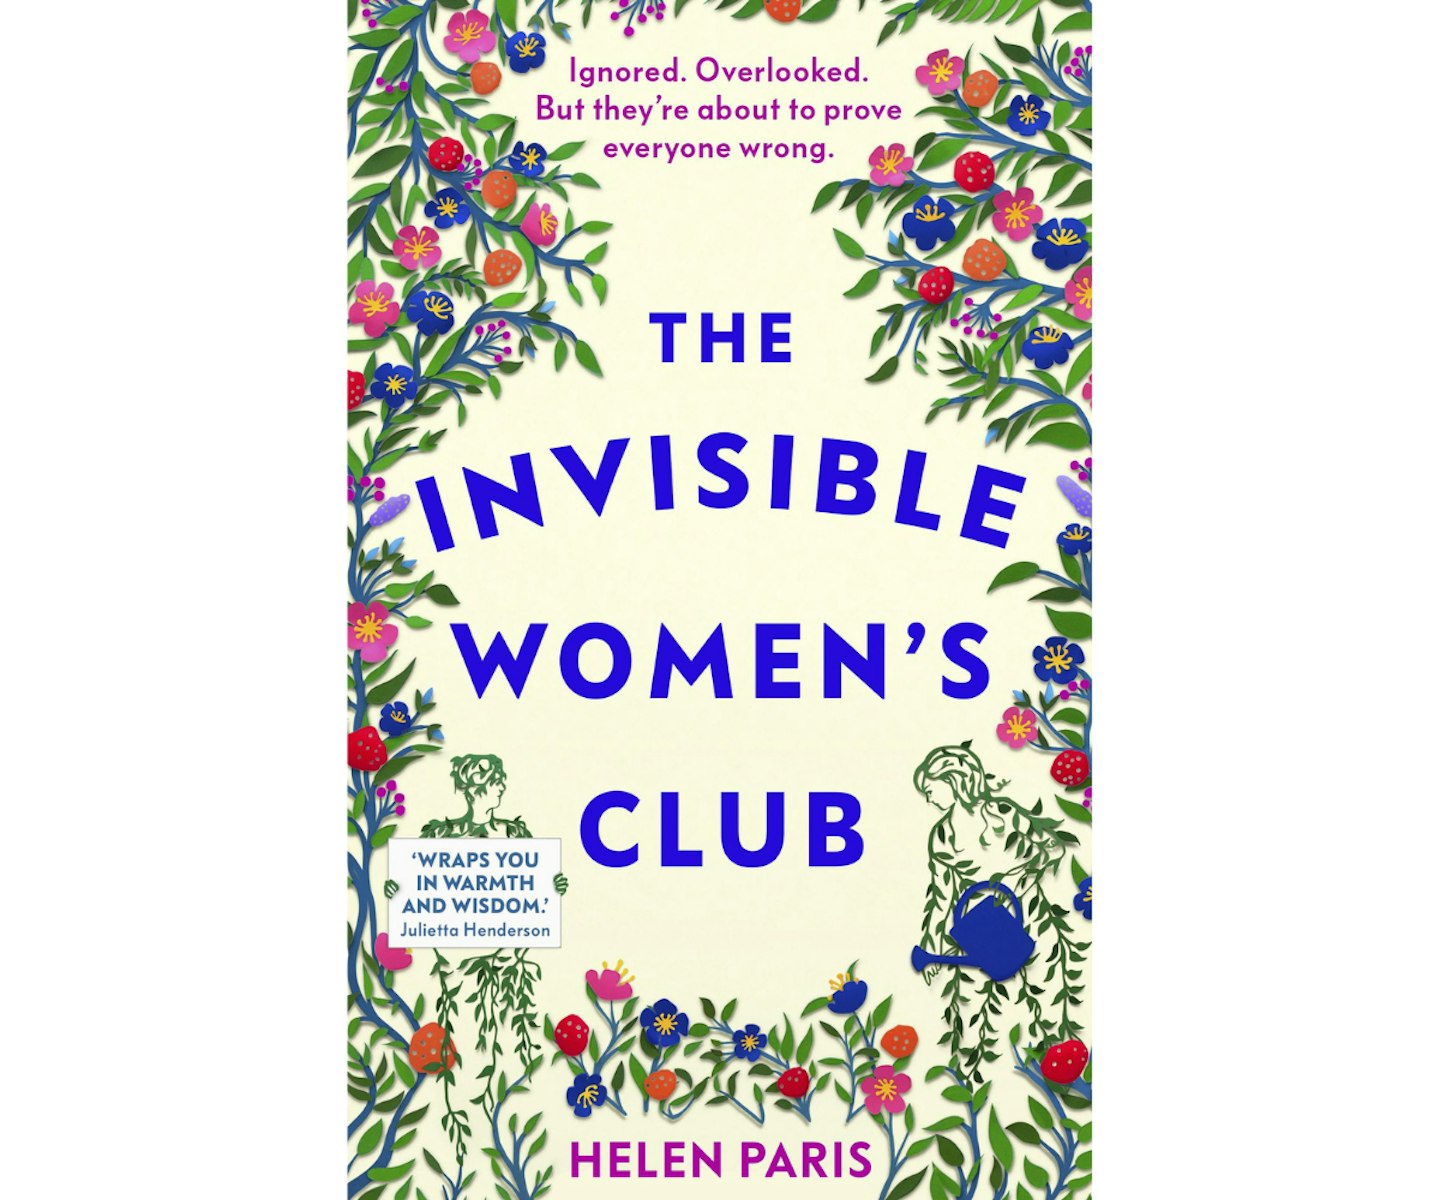 The Invisible Women's Club by Helen Paris